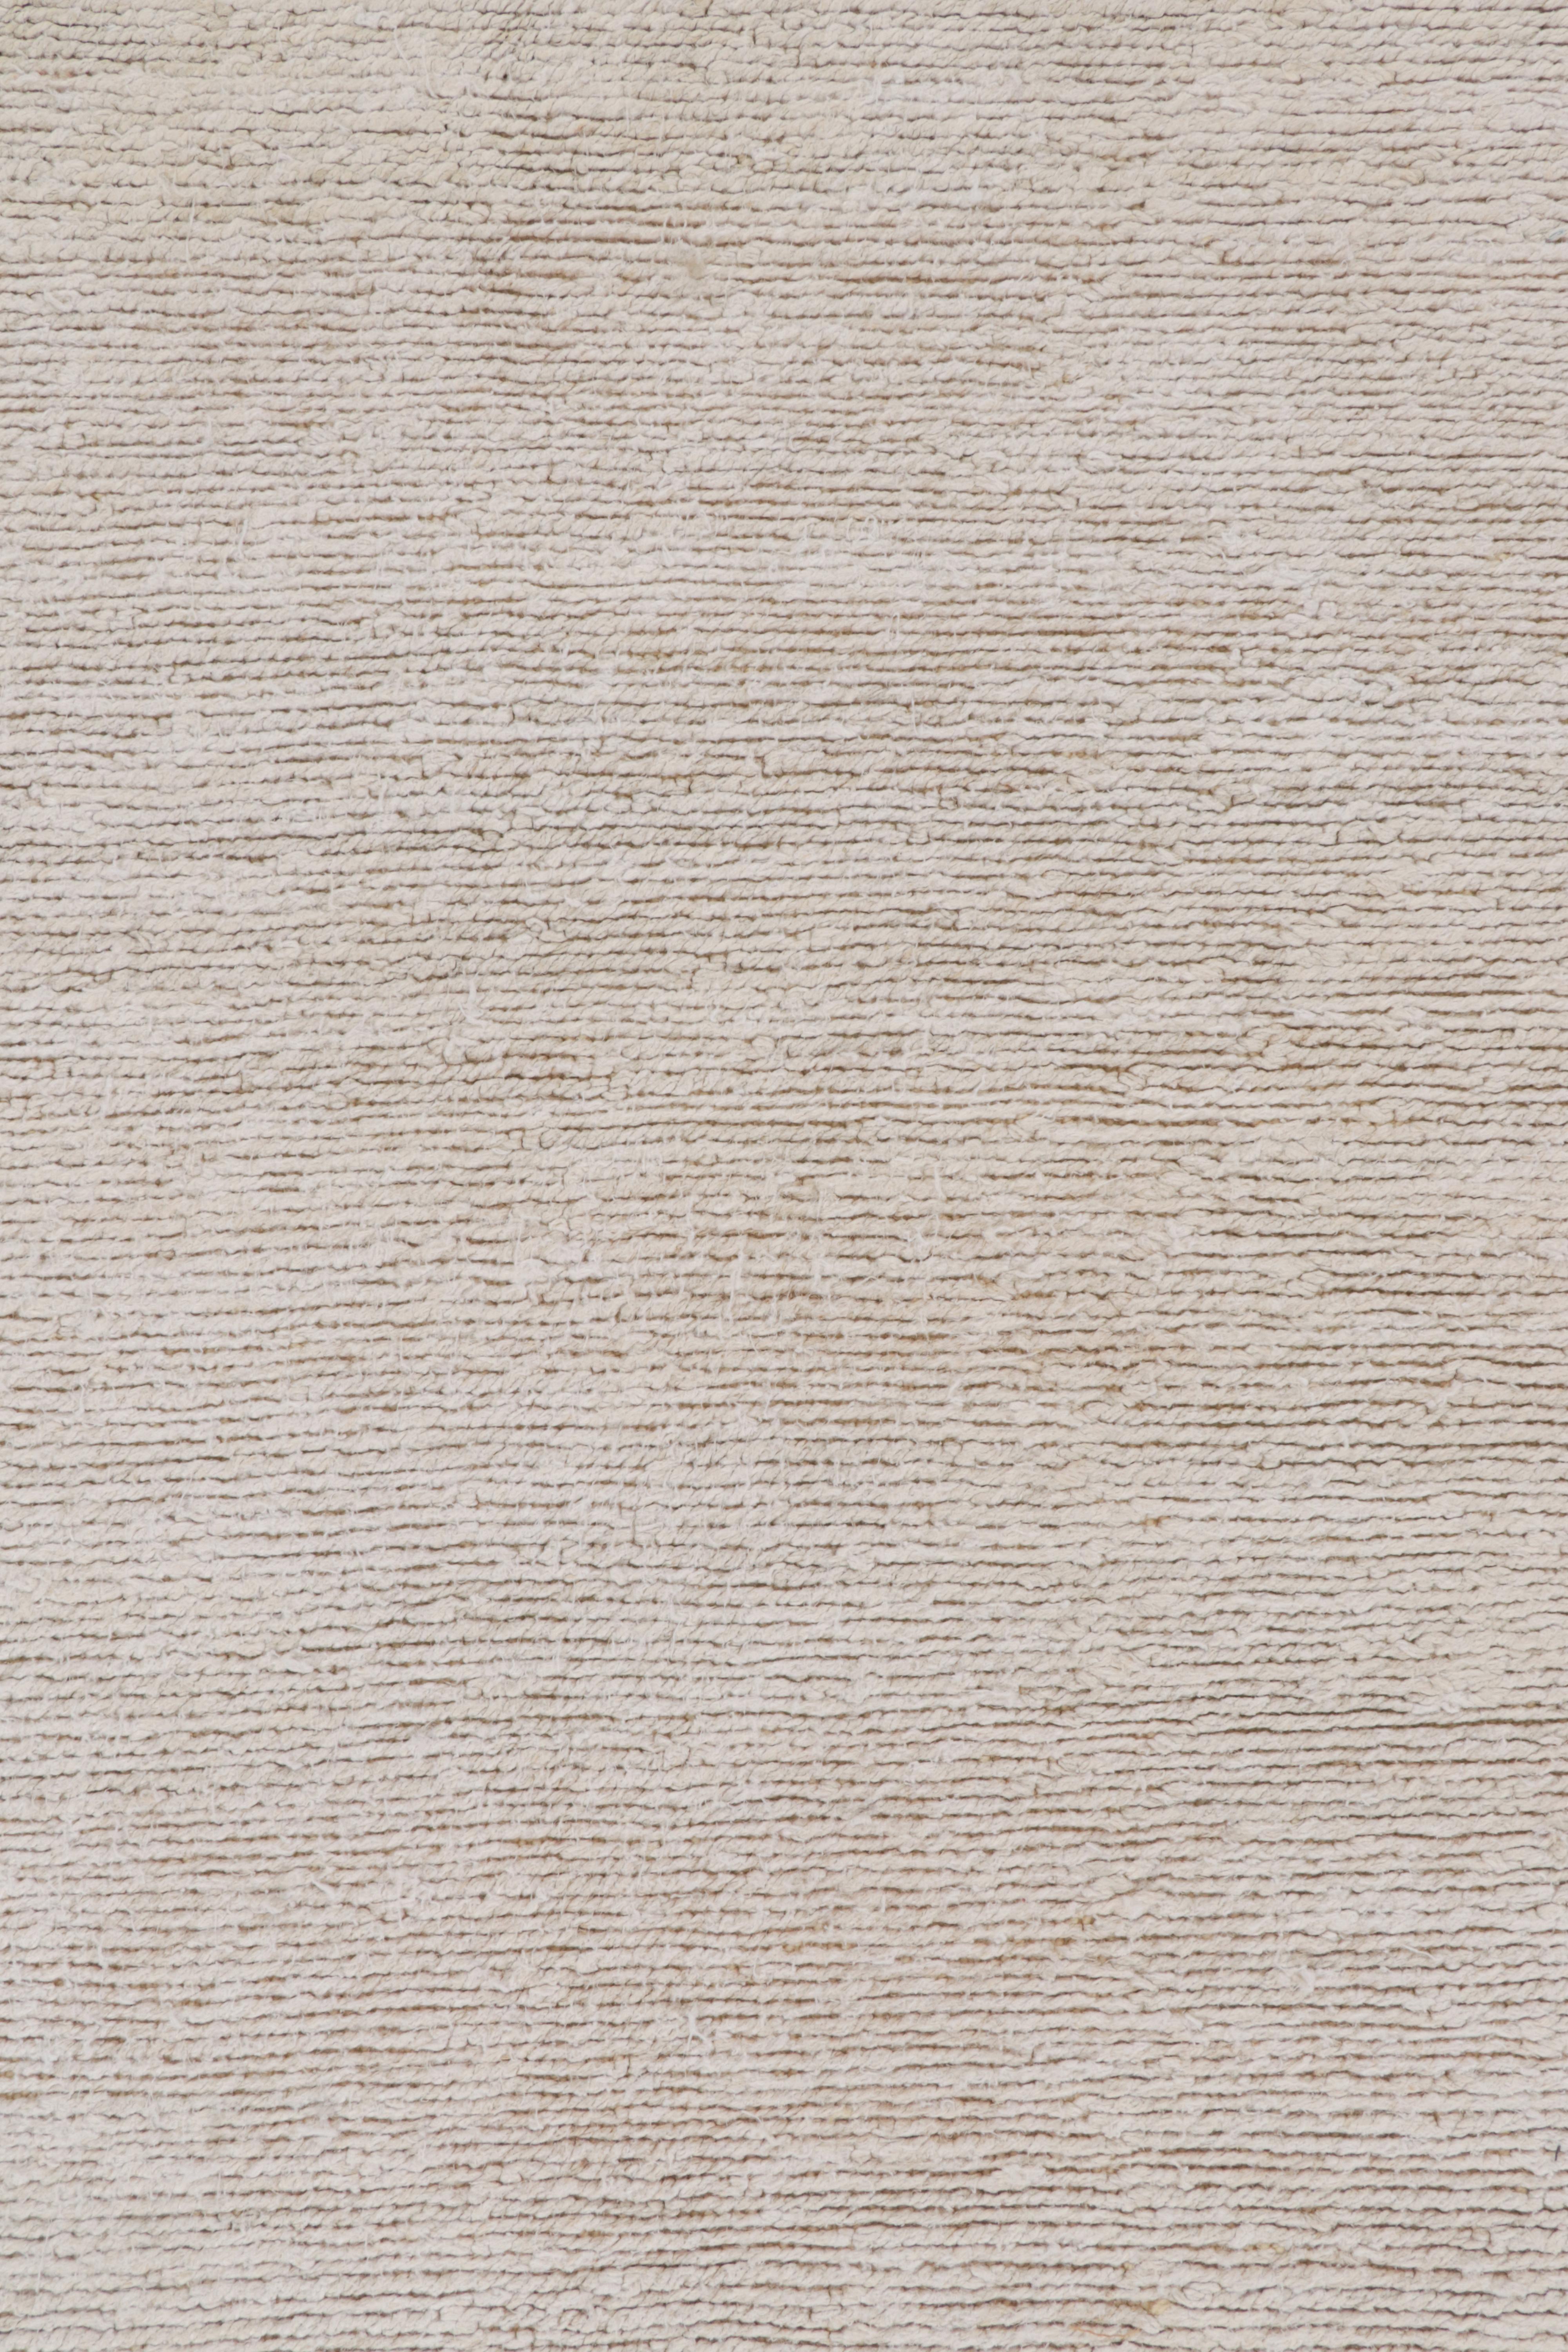 Rug & Kilim’s Contemporary Hemp Rug in Beige and Off-White Tones